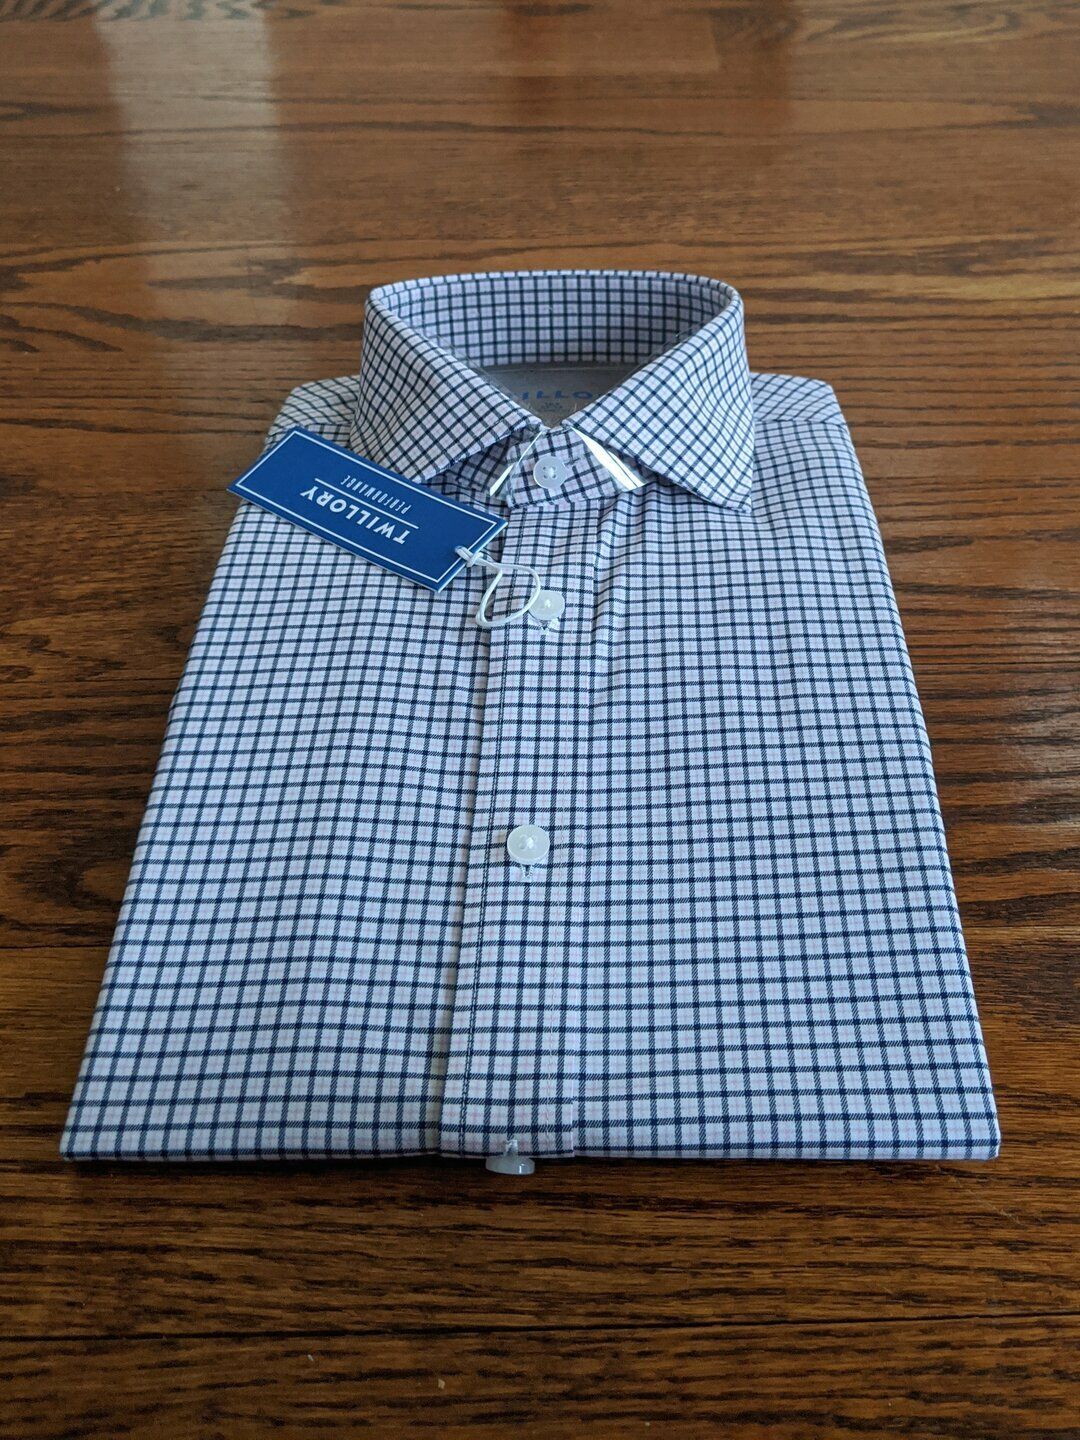 Initial Impressions: Twillory Shirts and Underwear